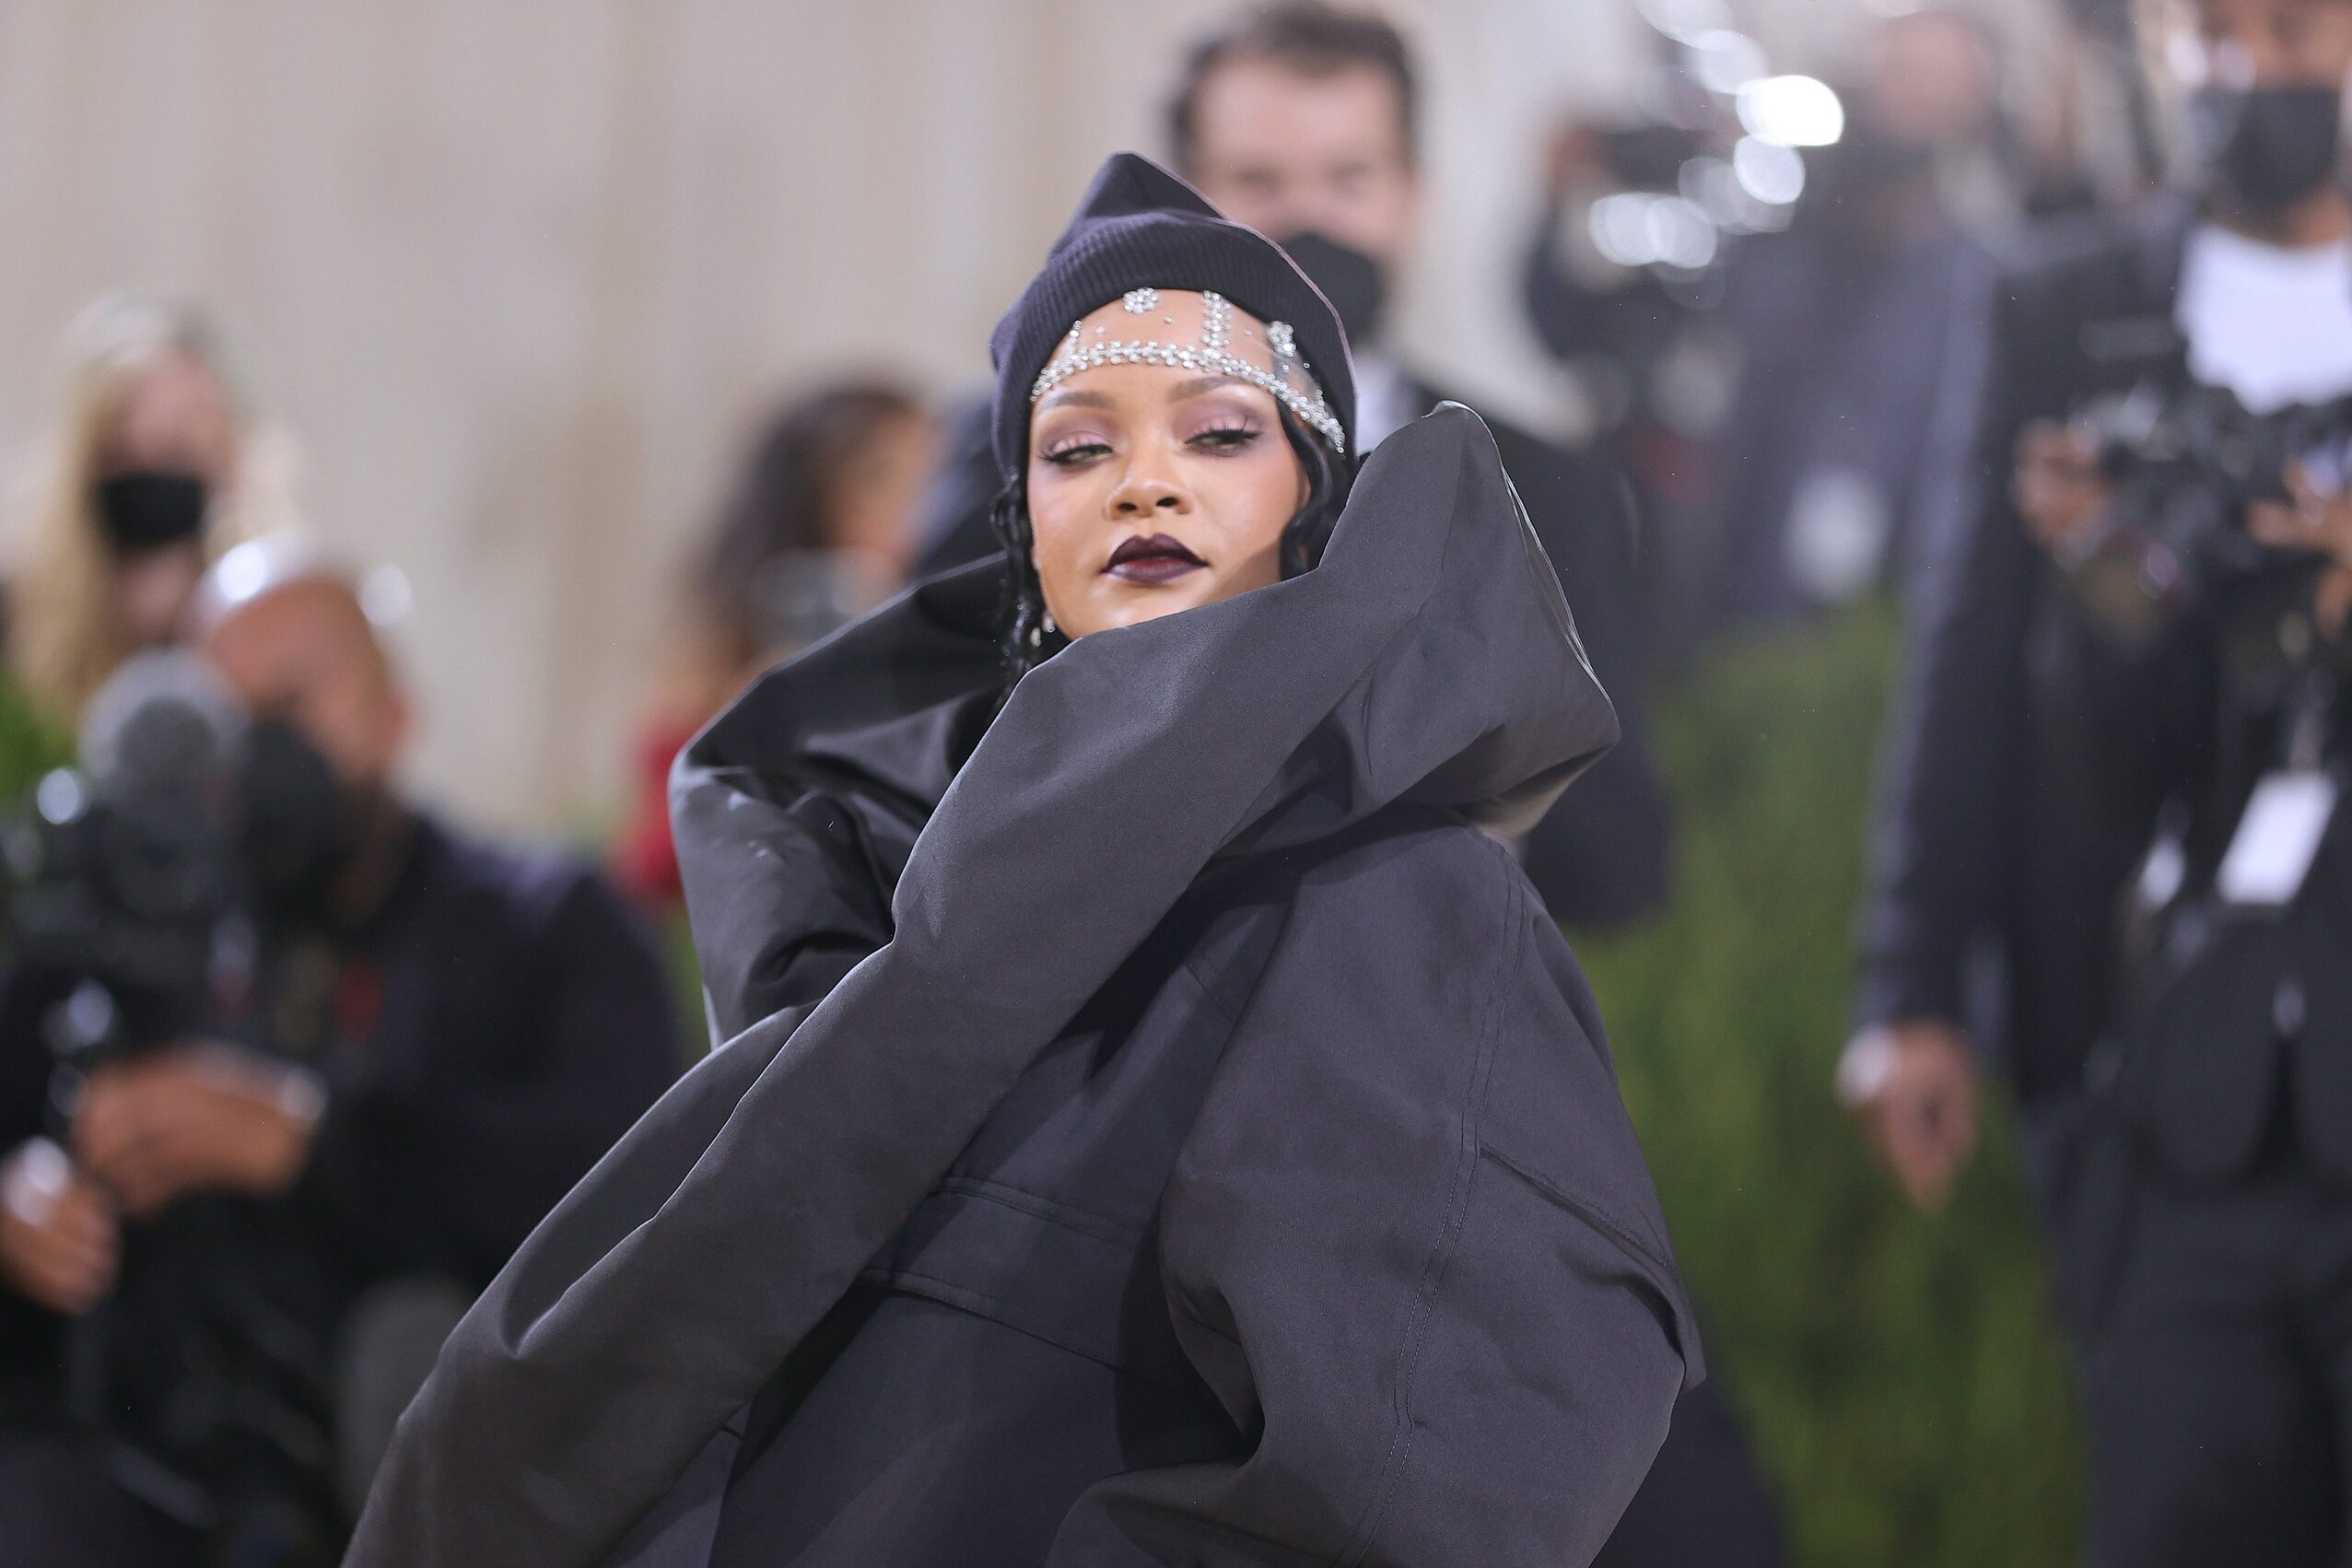 Met Gala 2021: See fashion moments from the biggest fashion night ever